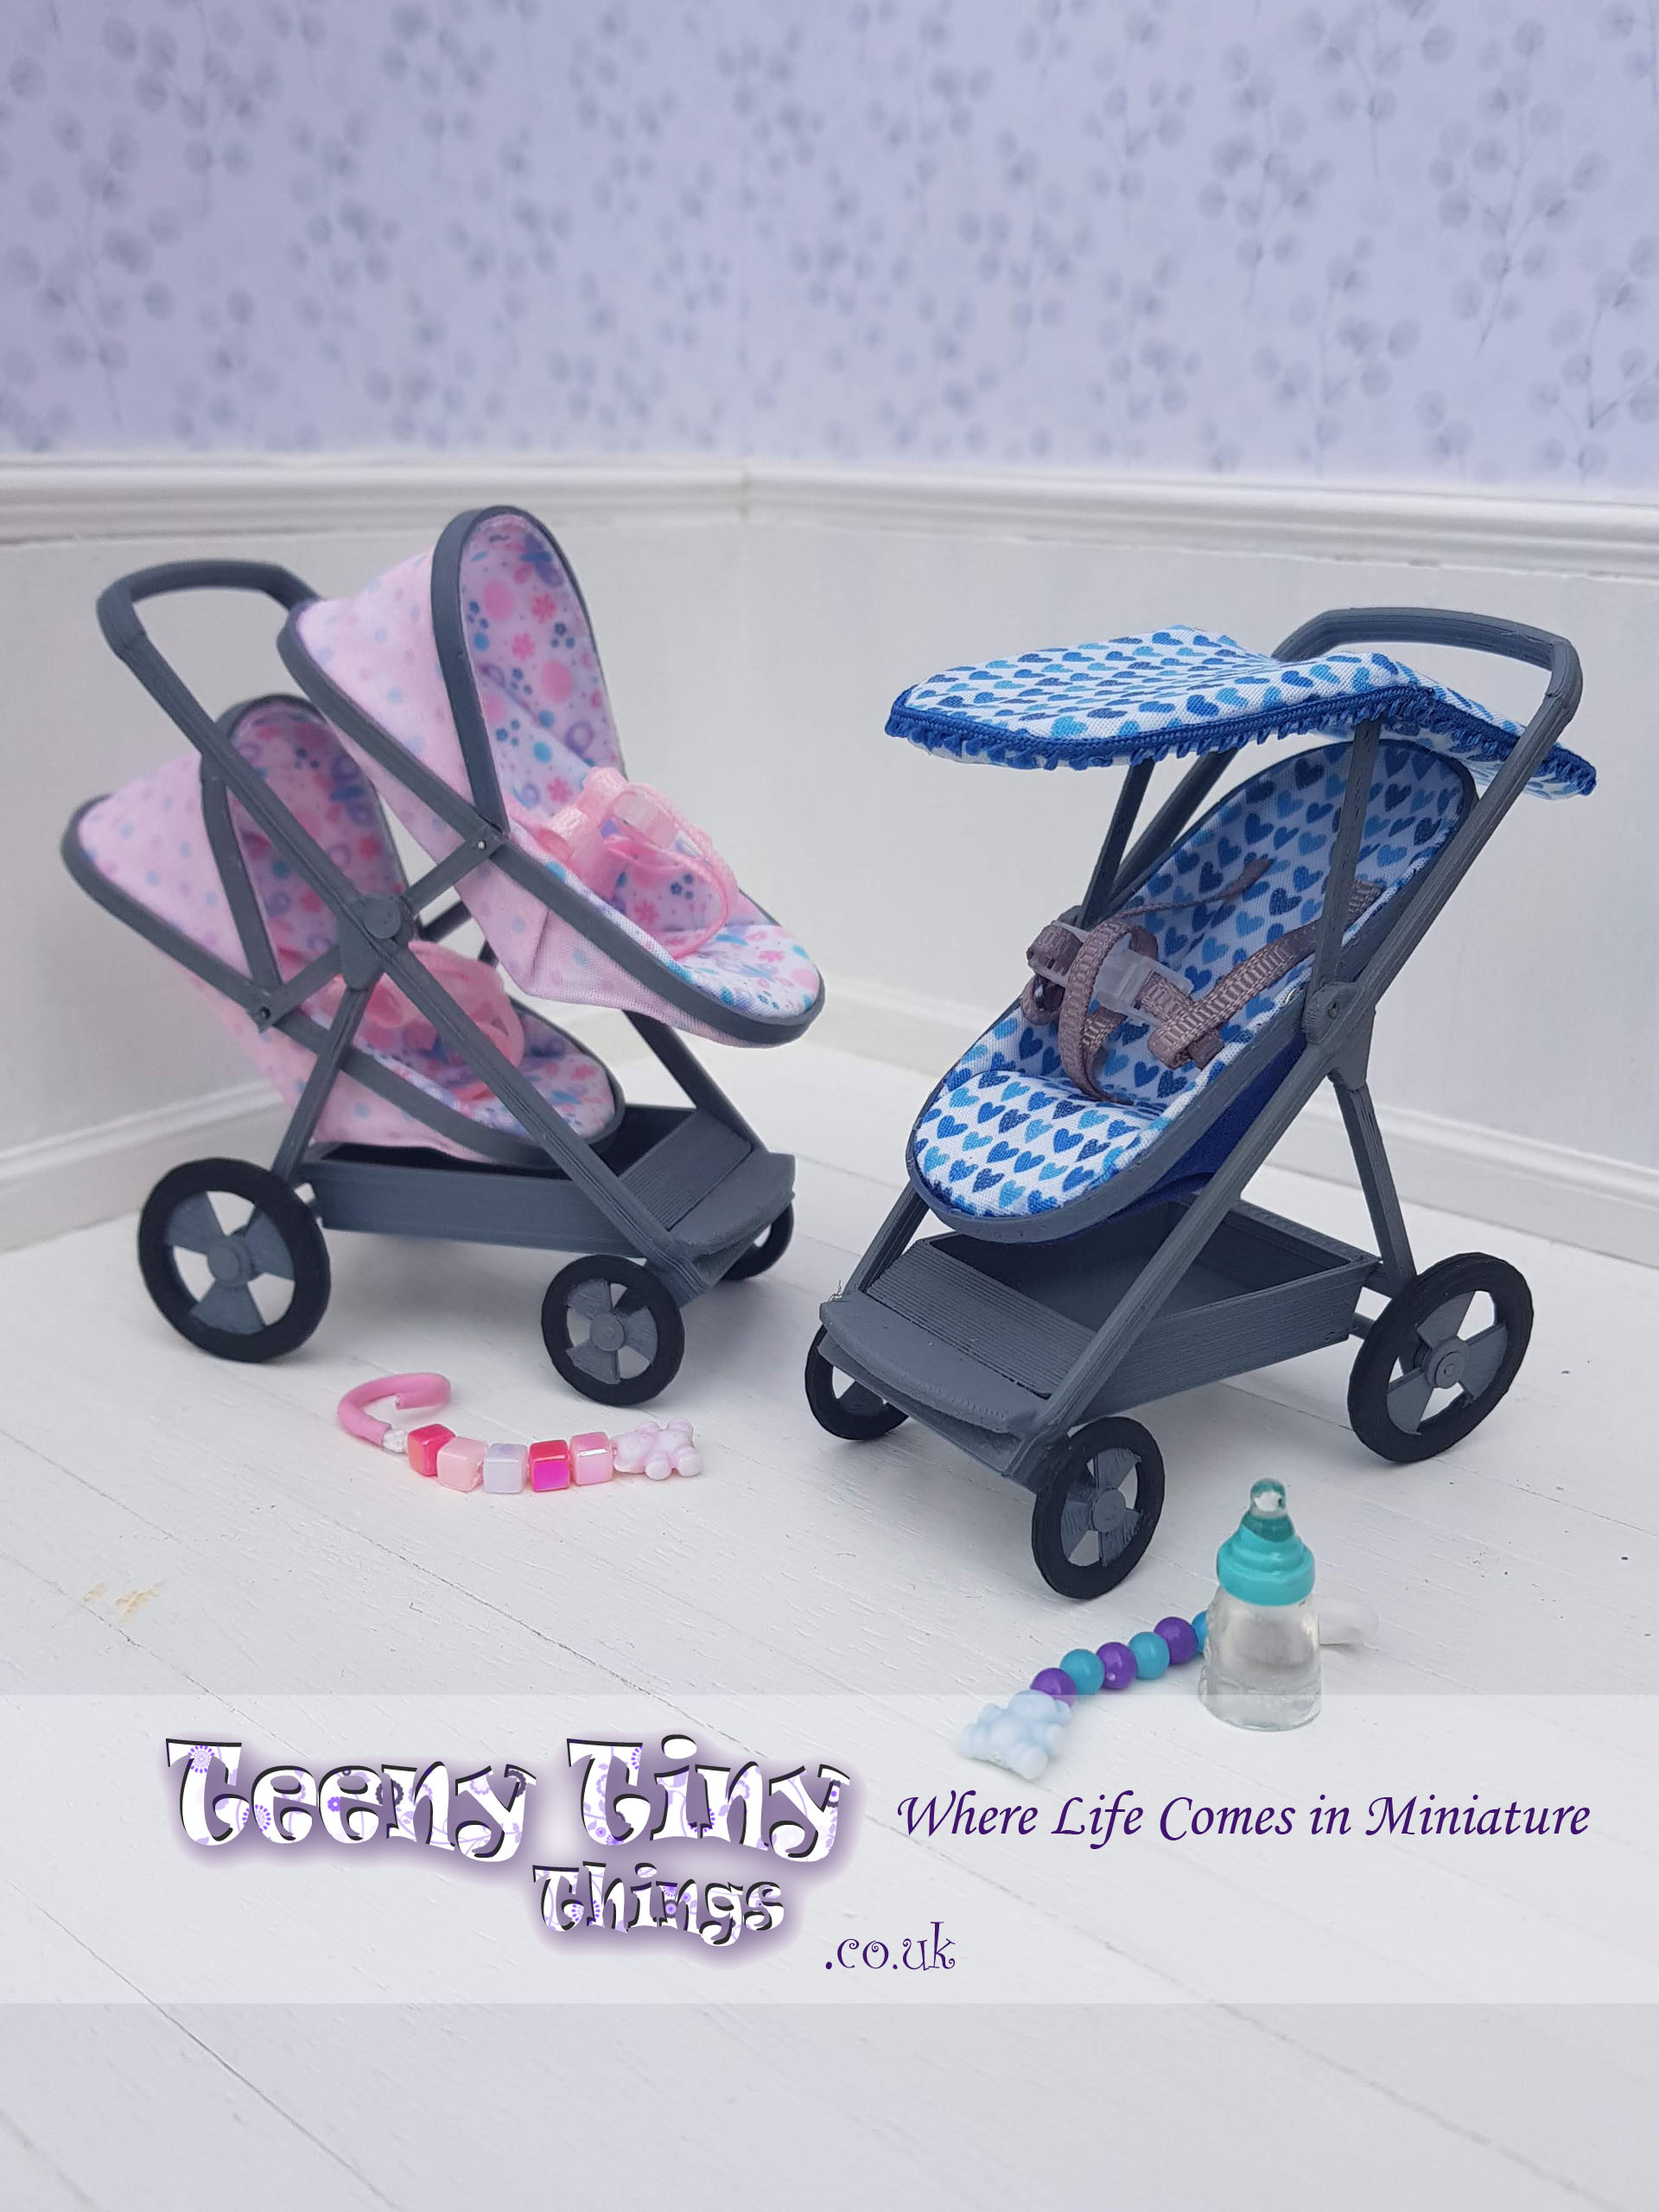 Curved-Frame Miniature Strollers.